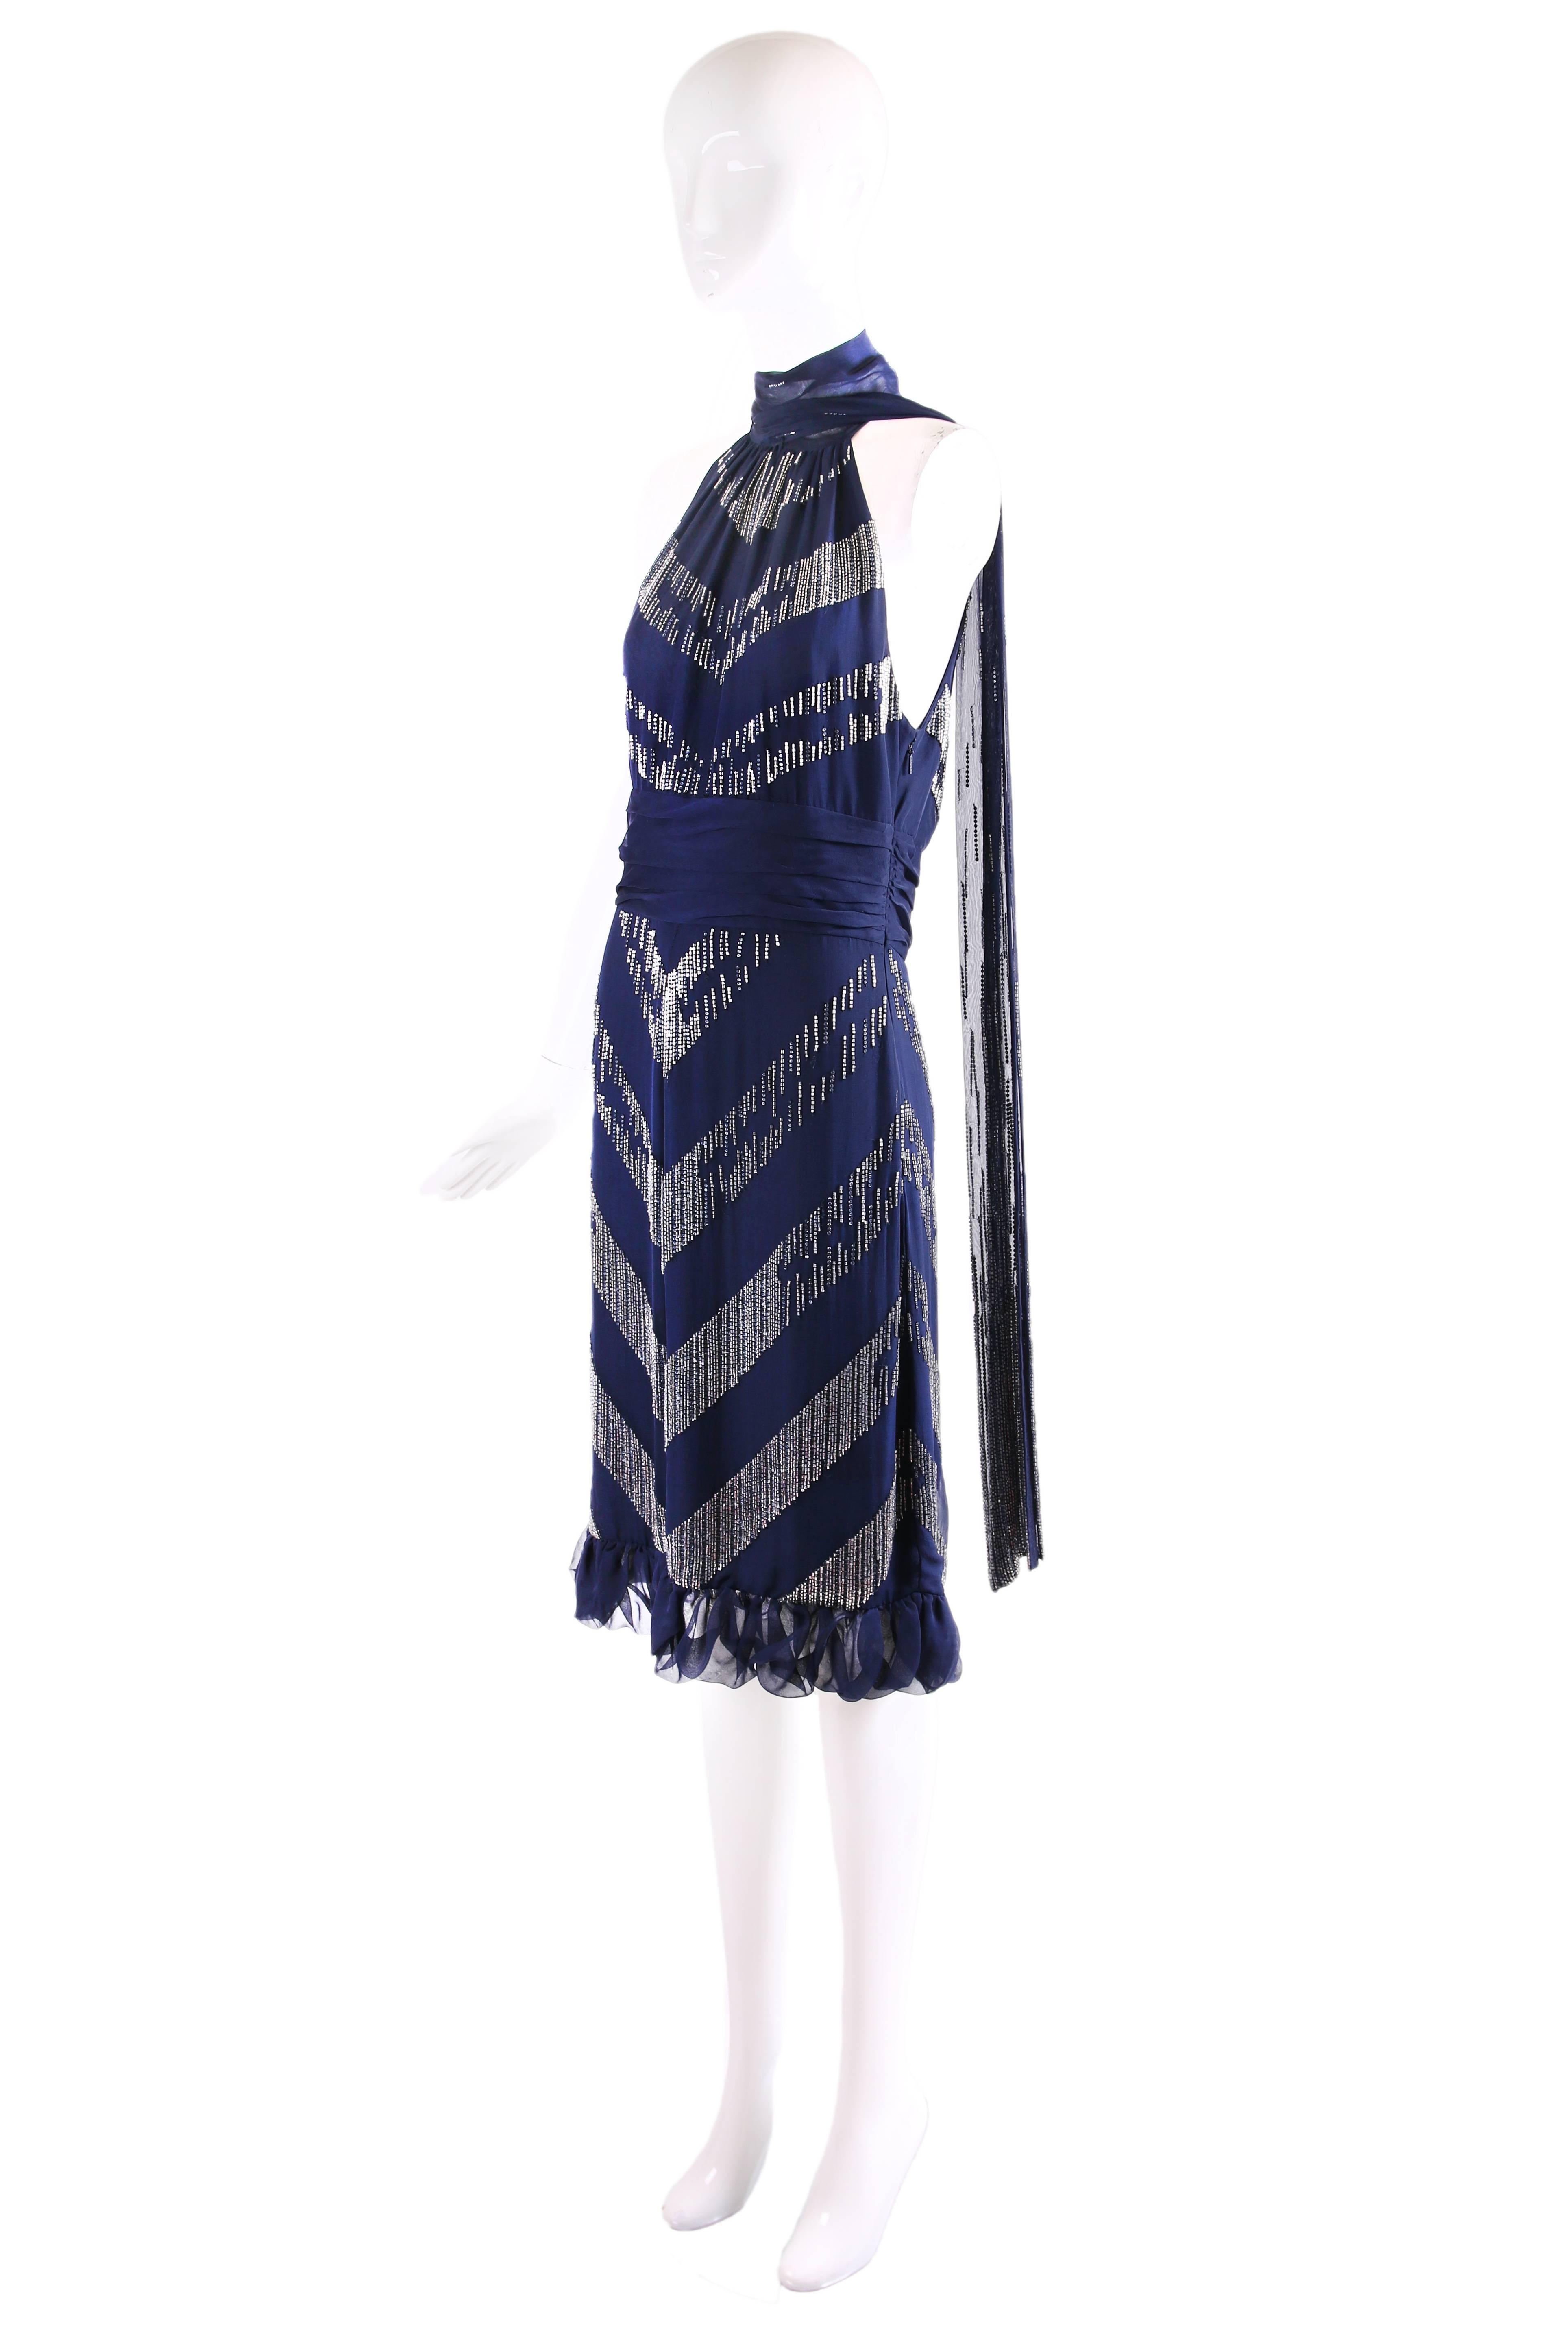 2006 Gucci navy blue silk halterneck cocktail dress featuring silver bugle beads in a chevron pattern. Dress features a plunging neckline, slit at center back, ruching at the waist, and oversized neckties which, when tied, hang dramatically down the